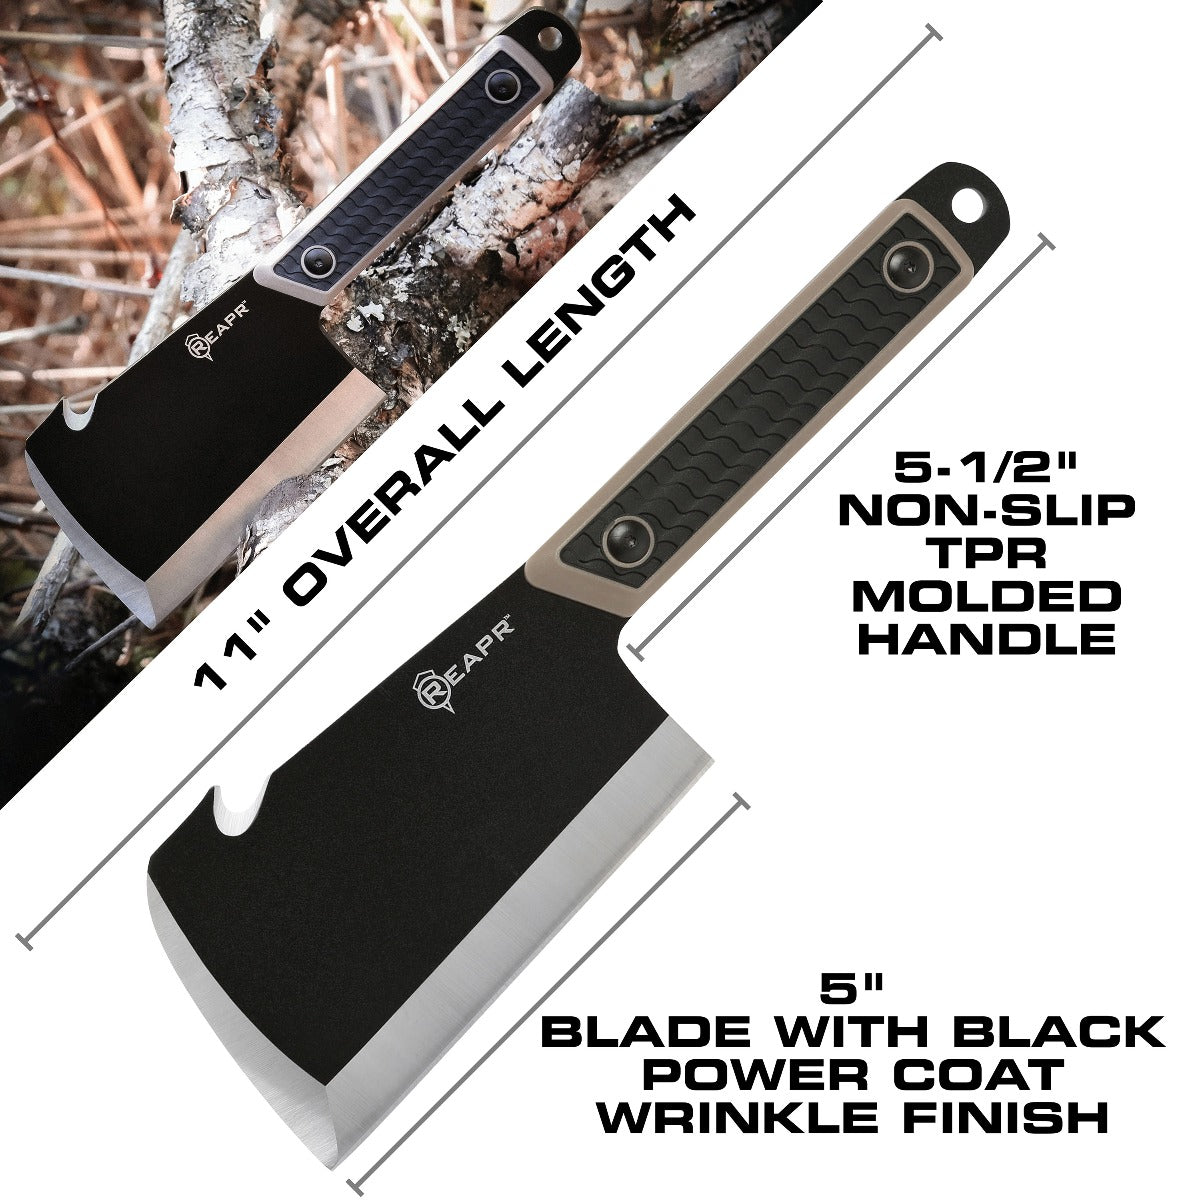 Look no further for the most versatile in fixed blade knives. The Reapr Versa CLEAVR cleaver knife perfect for almost any use. Take it on the trail and use it as a mini axe or machete to help clear brush. Take it camping to help whittle wood for the fire or rip rope. www.defenceqstore.com.au